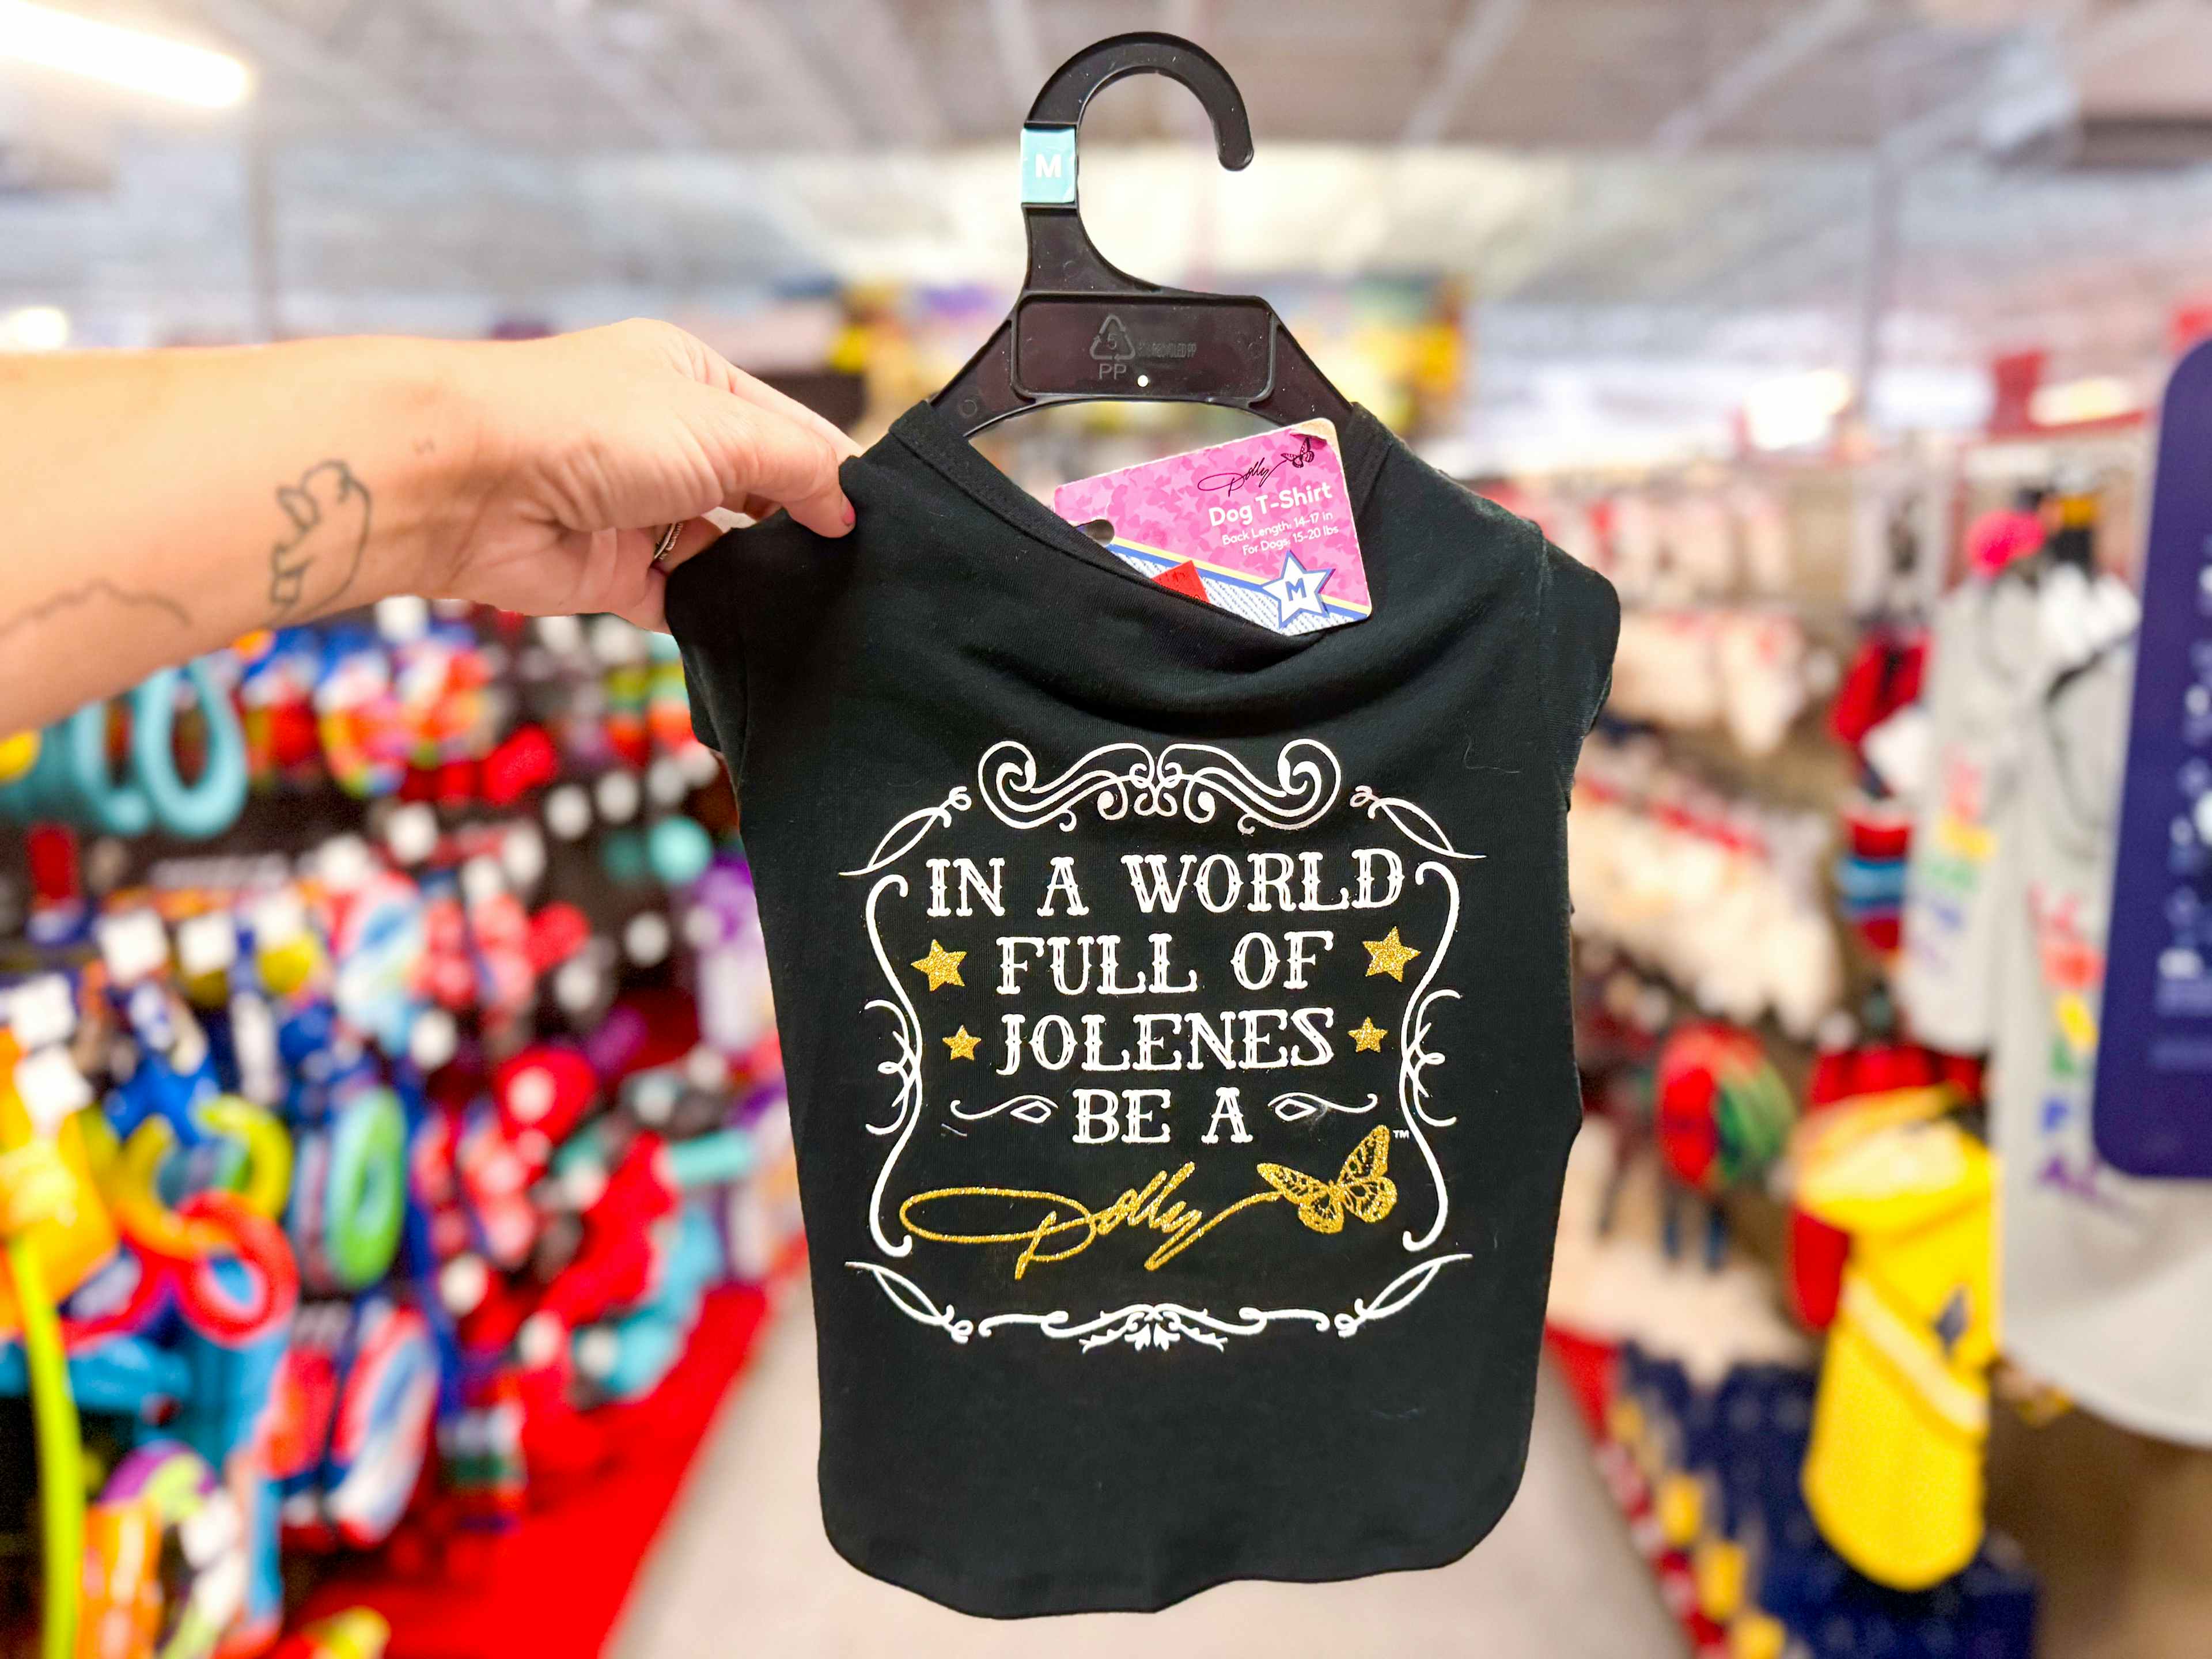 person holding a dog tshirt that says in a world full of jolenes be a dolly